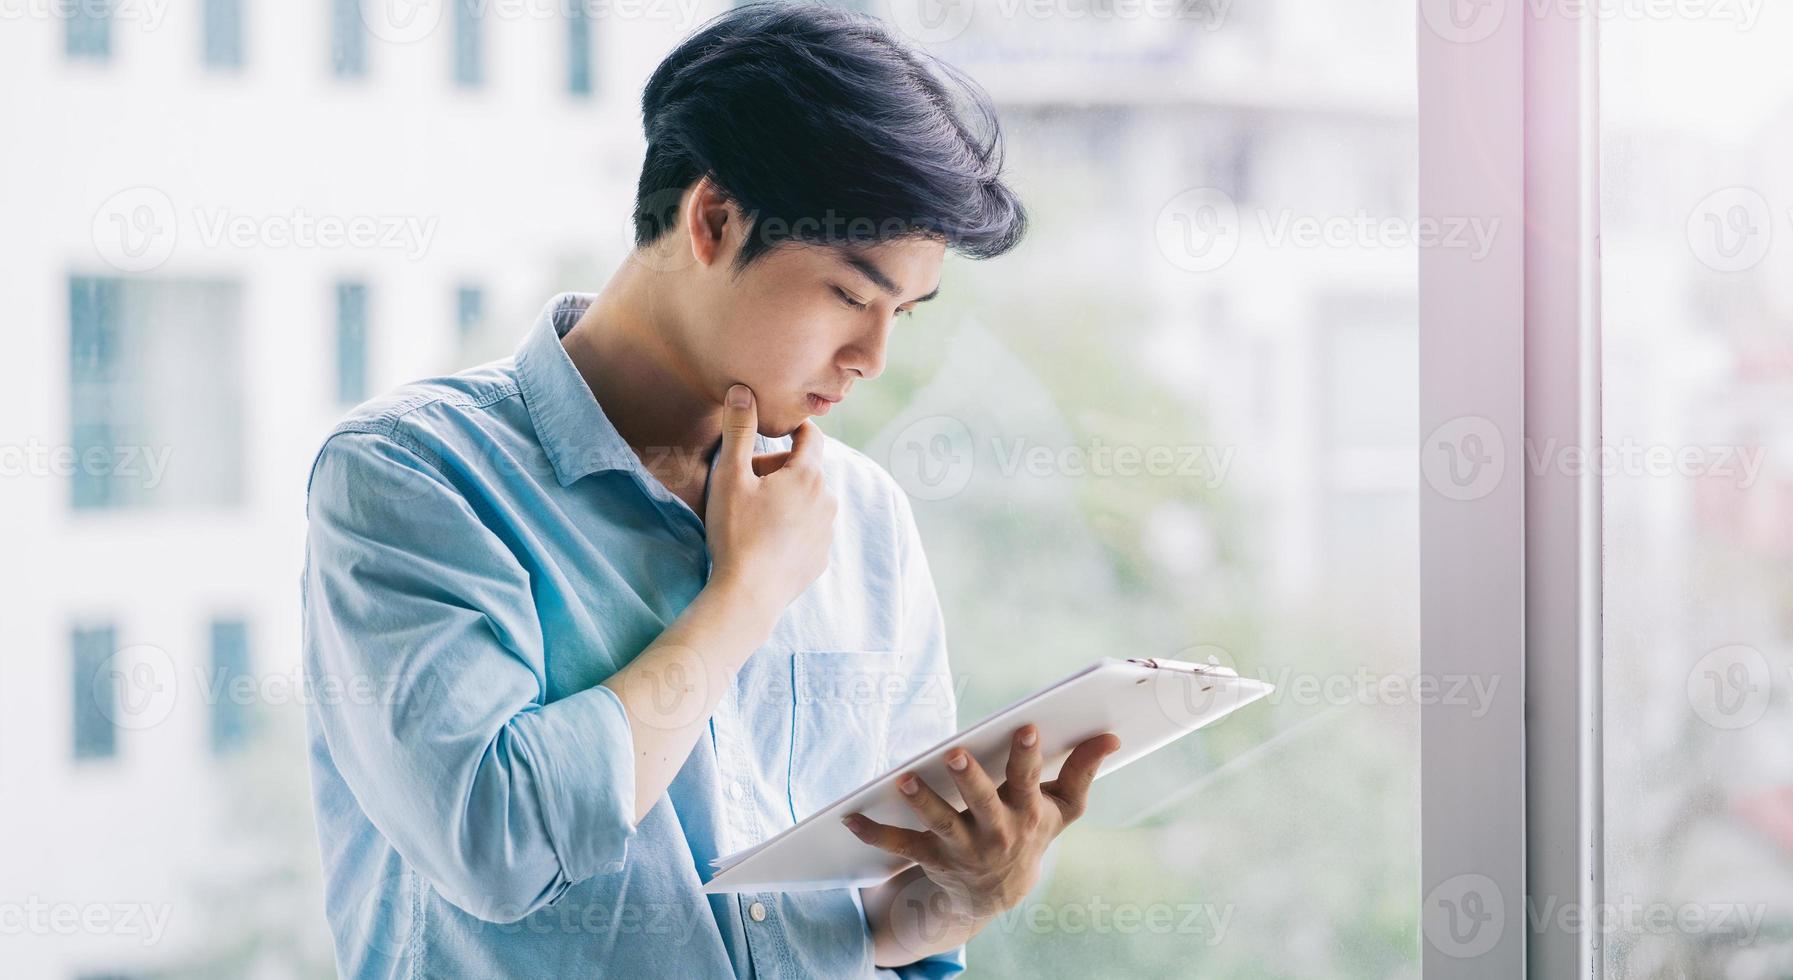 Portrait of an Asian male businessman working attentively photo